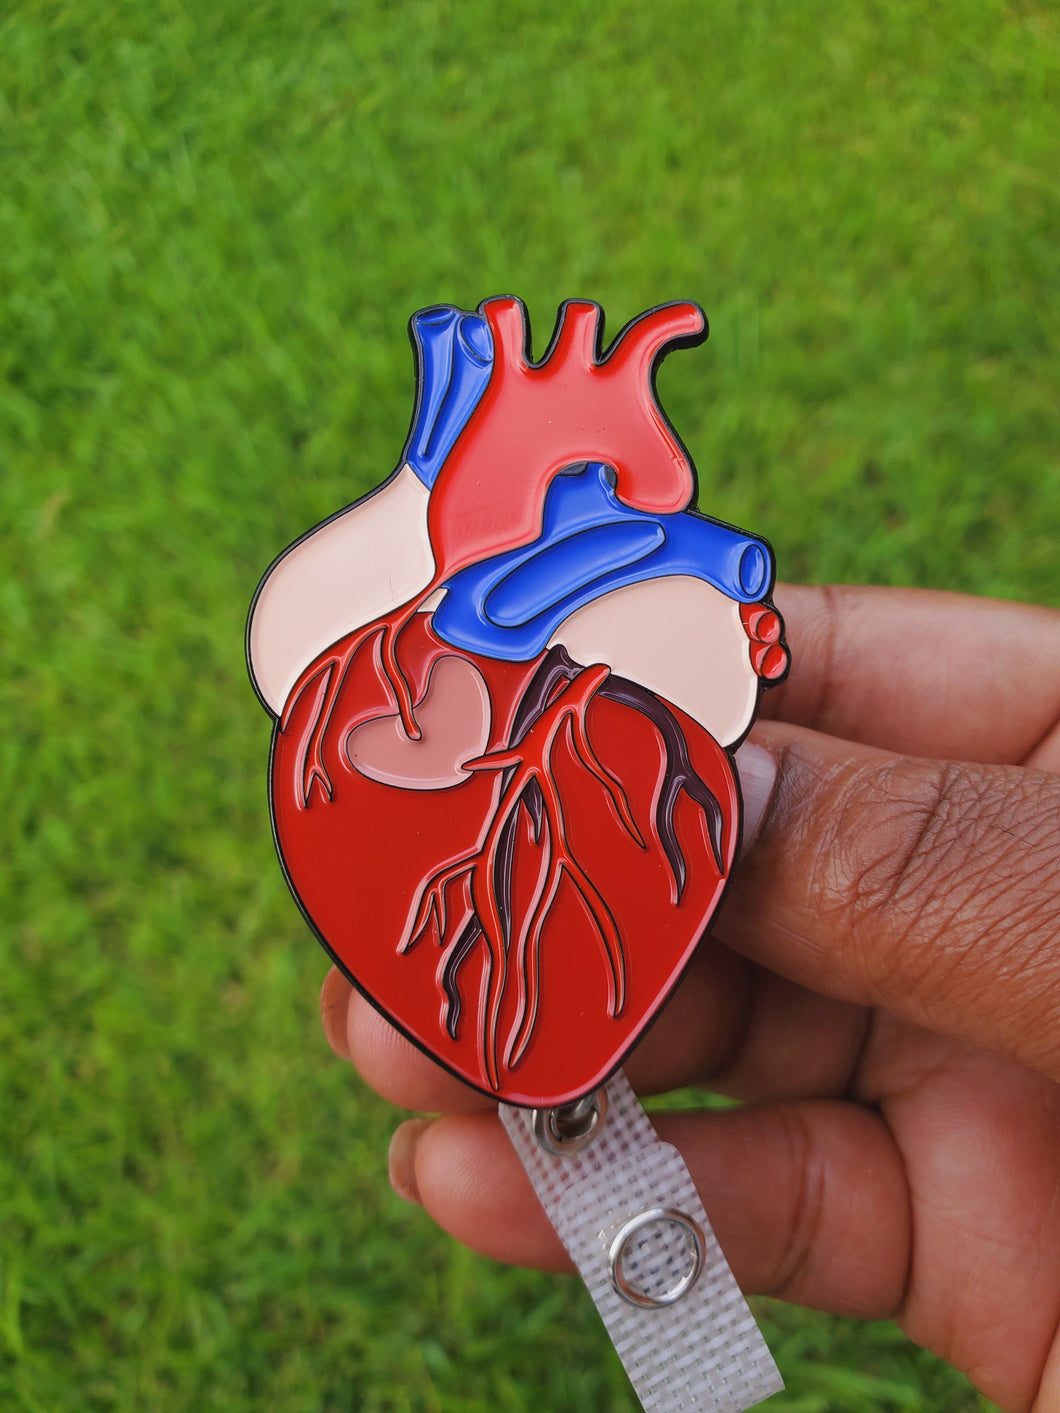 Perfect Heart Badge For Healthcare workers